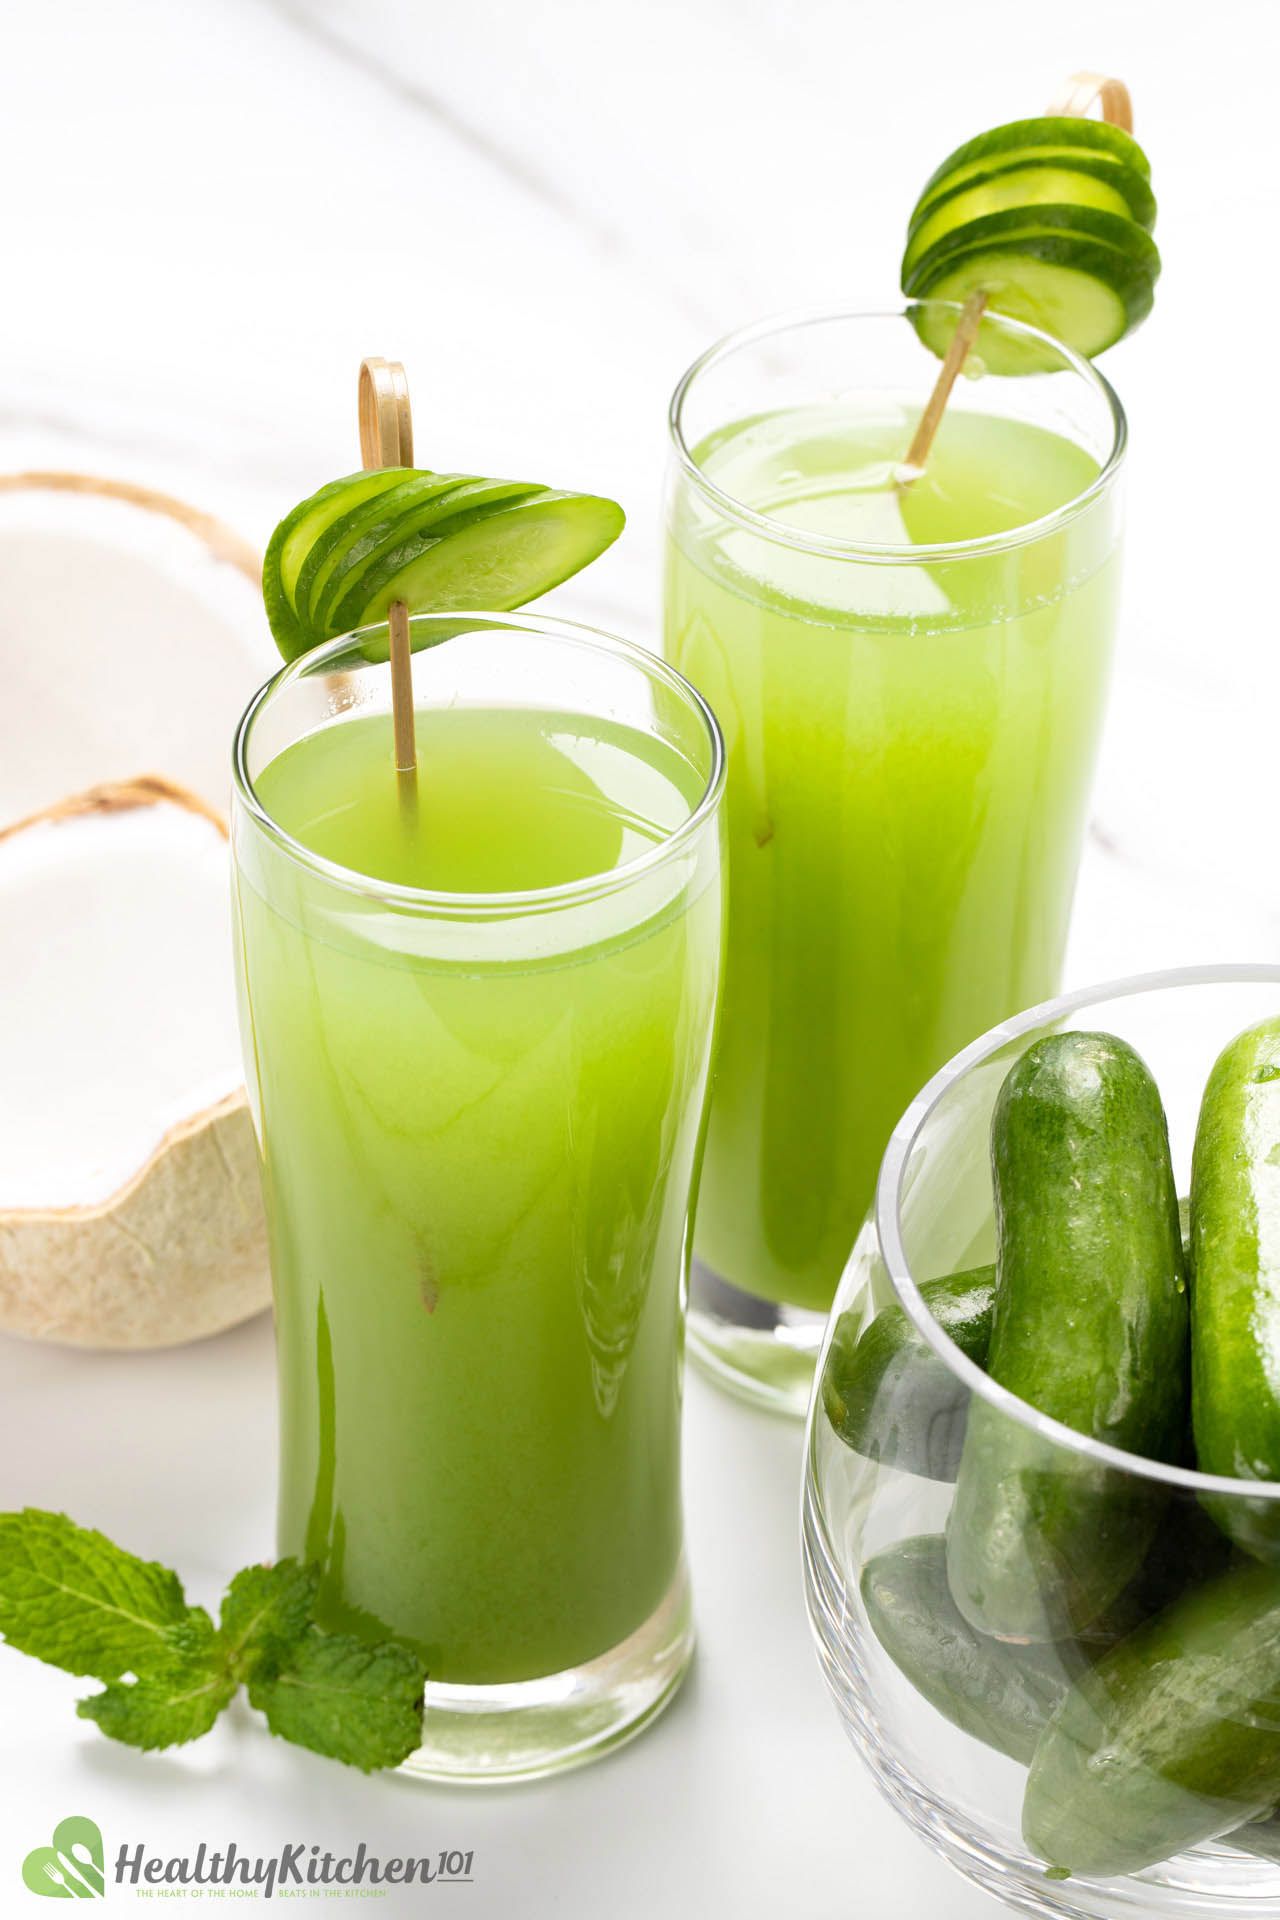 What Is The Best Time To Drink Cucumber Juice? 